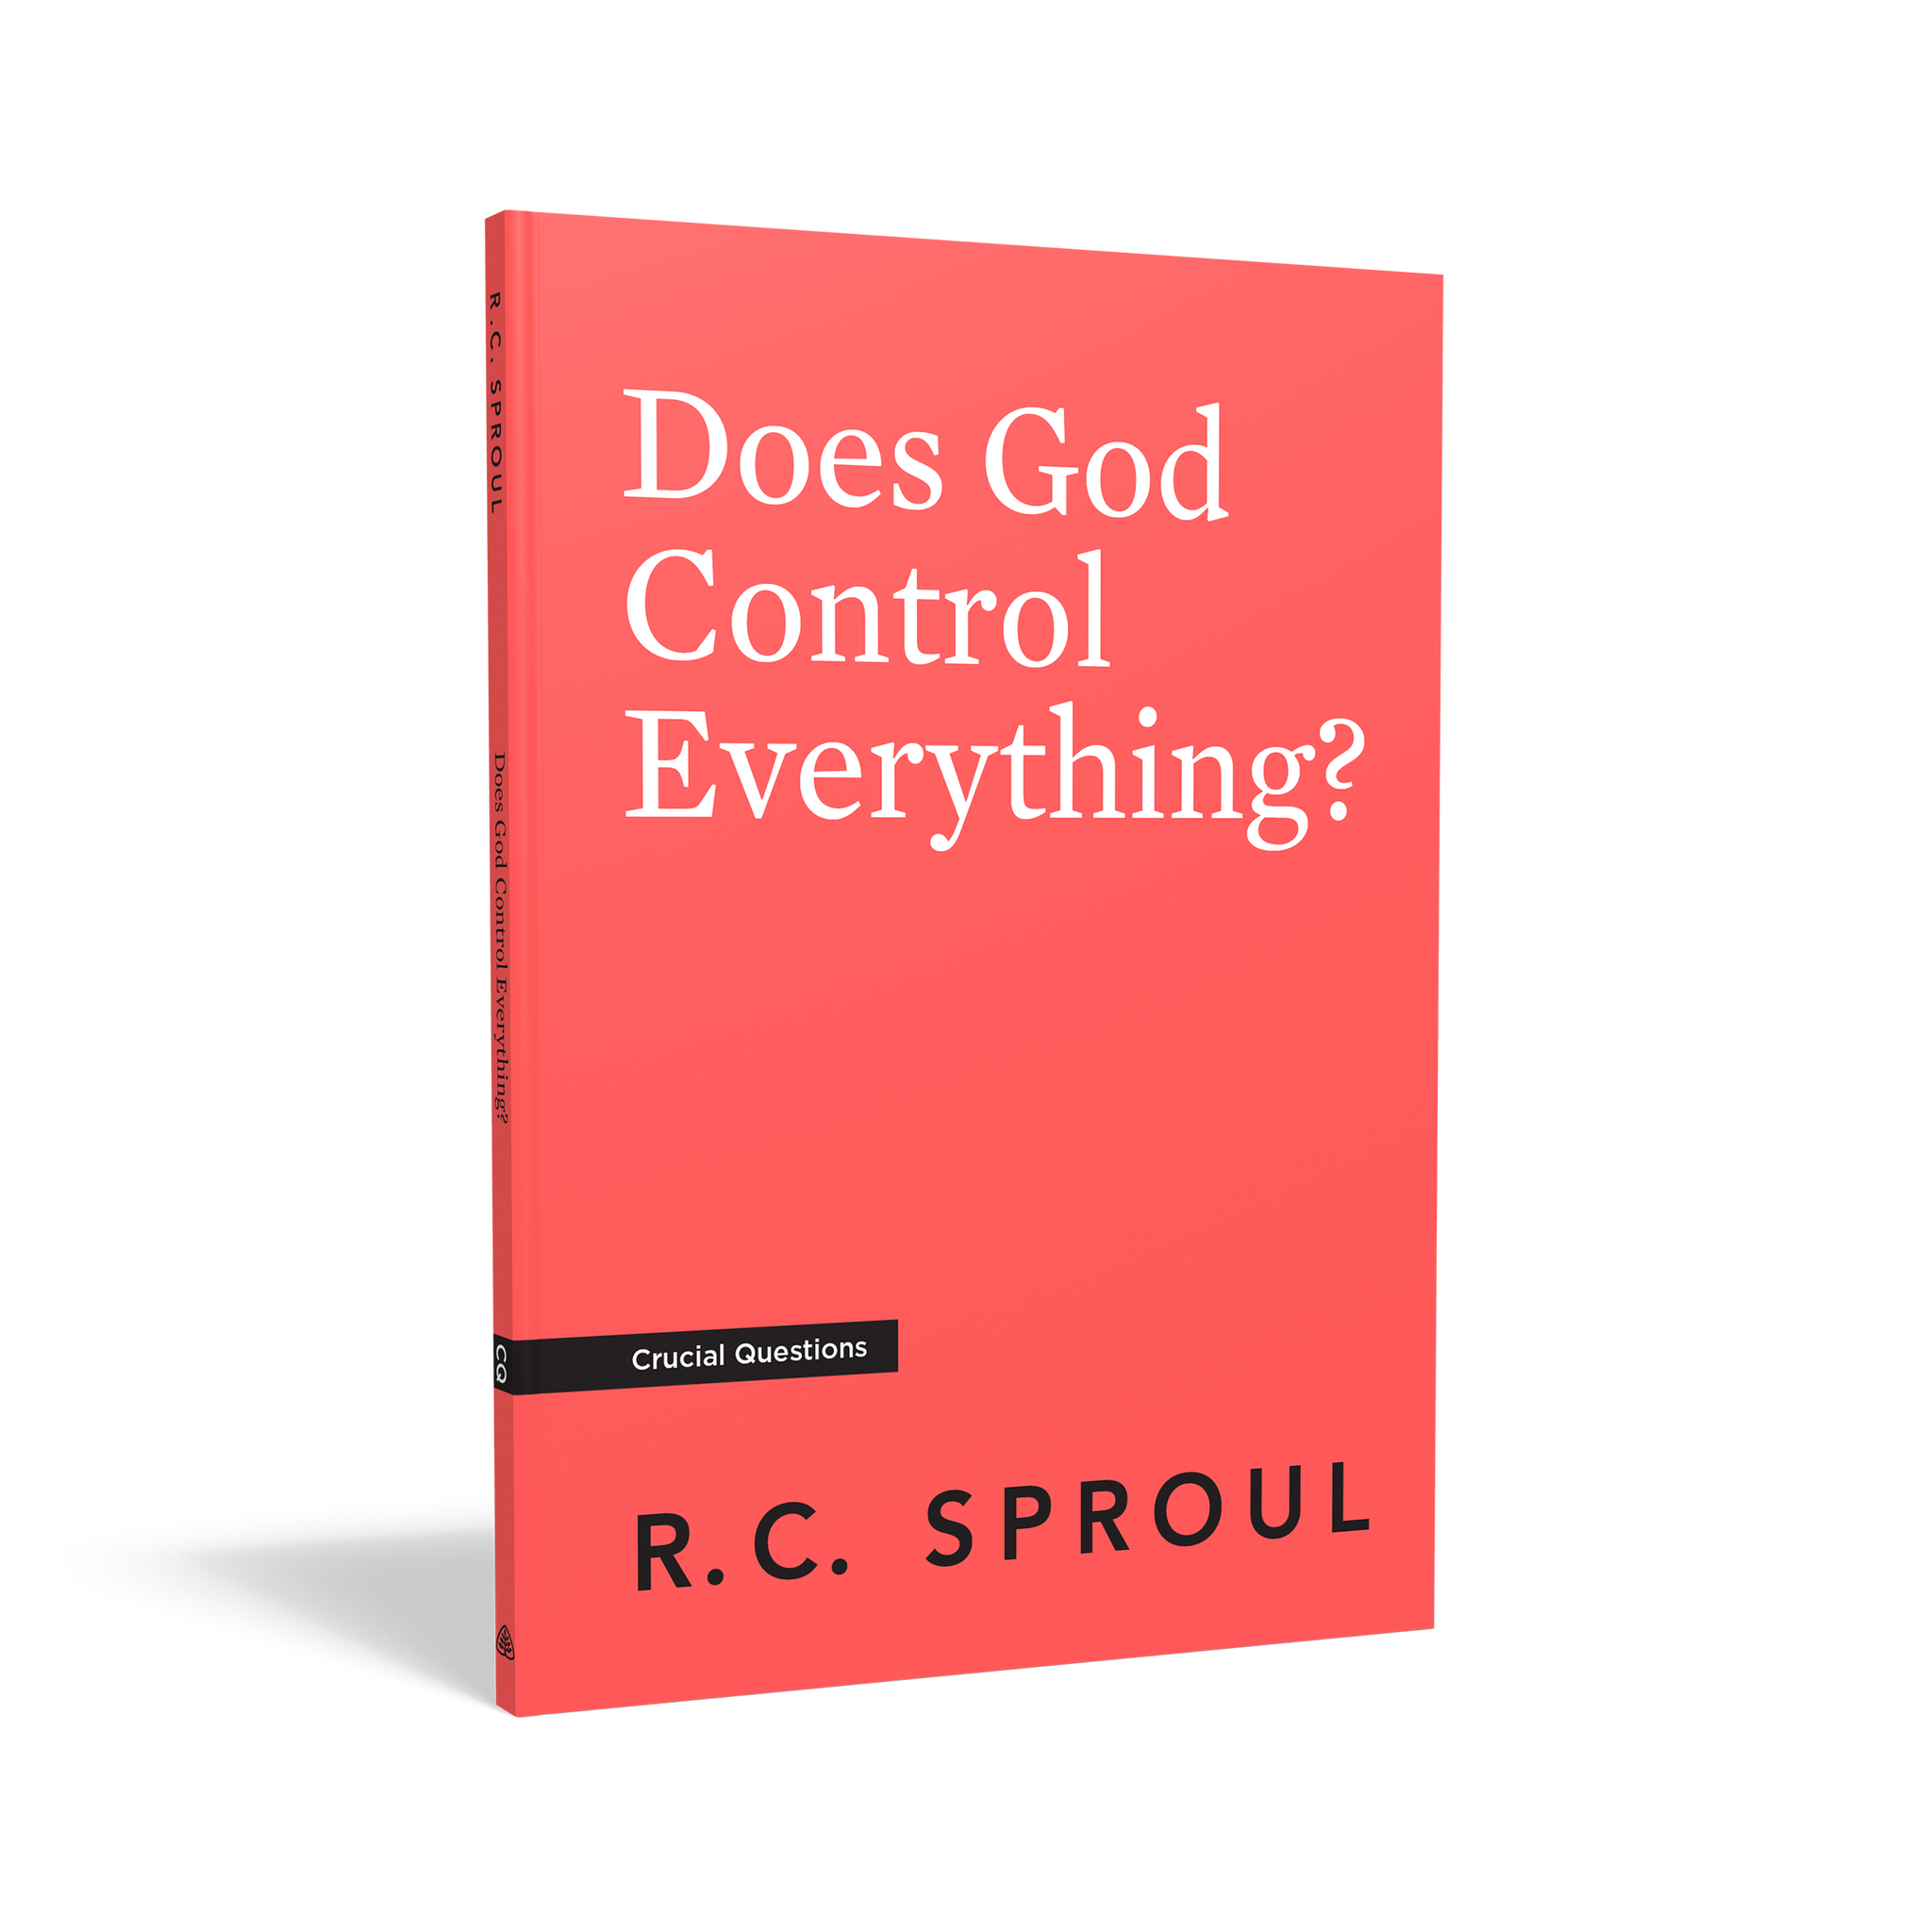 Crucial Questions - Does God Control Everything?